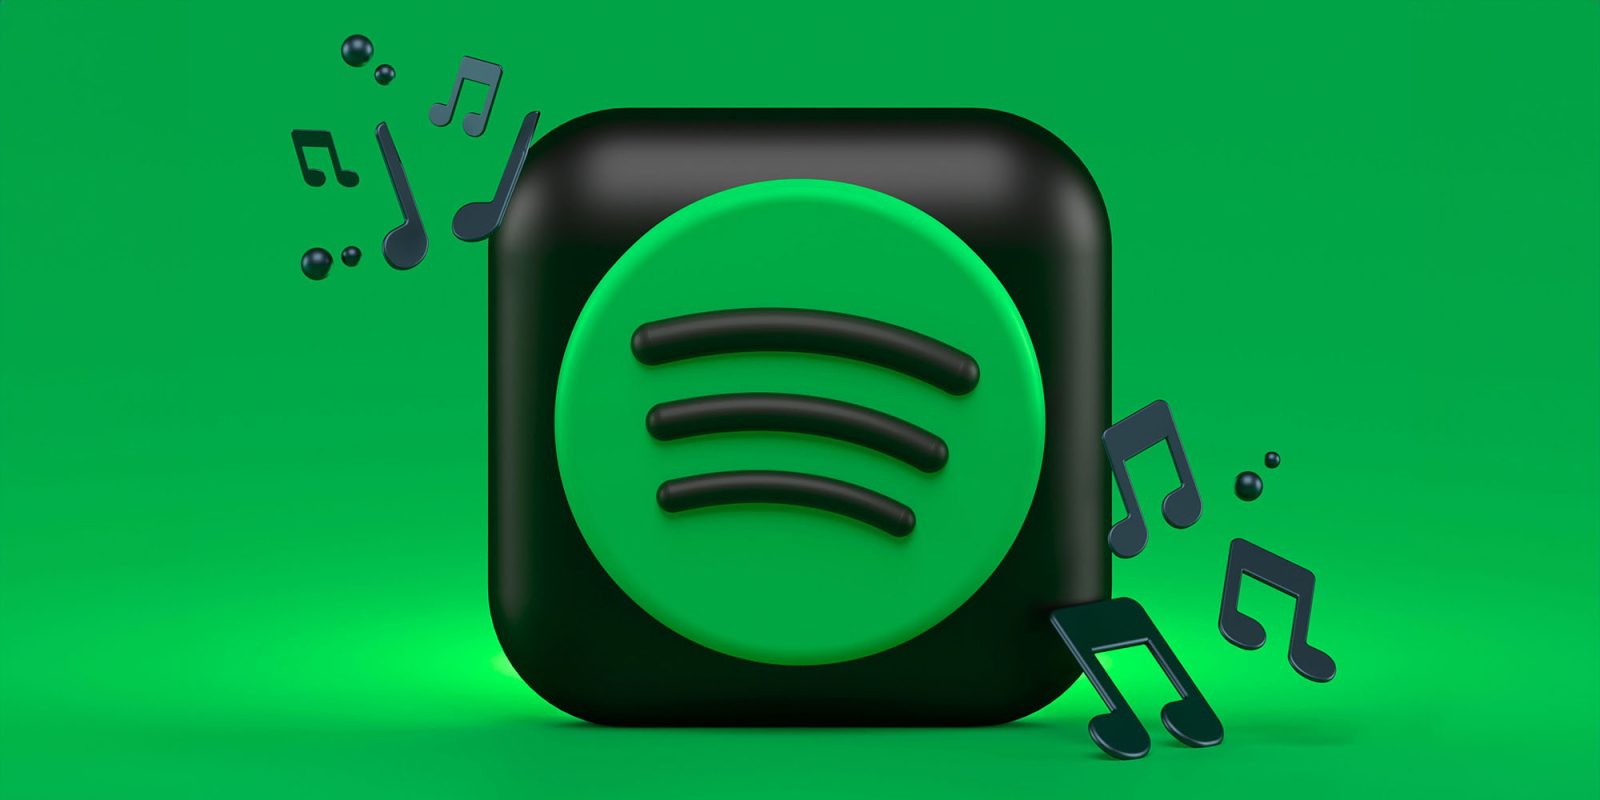 Neil Young and Joni Mitchell return to Spotify | 3D logo